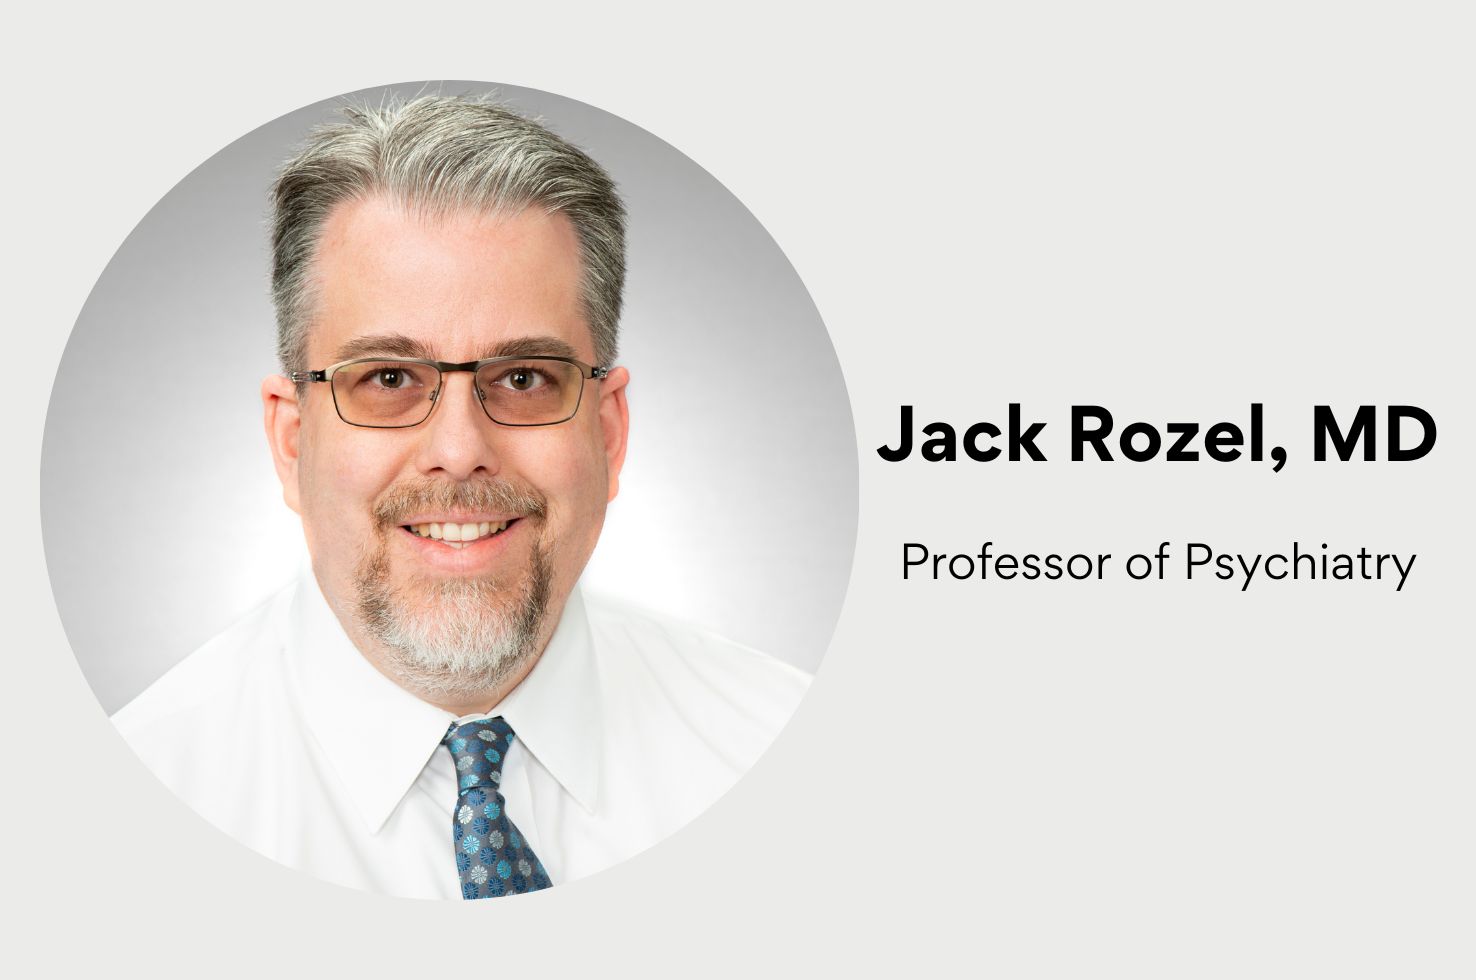 Dr. Jack Rozel Promoted to Professor of Psychiatry